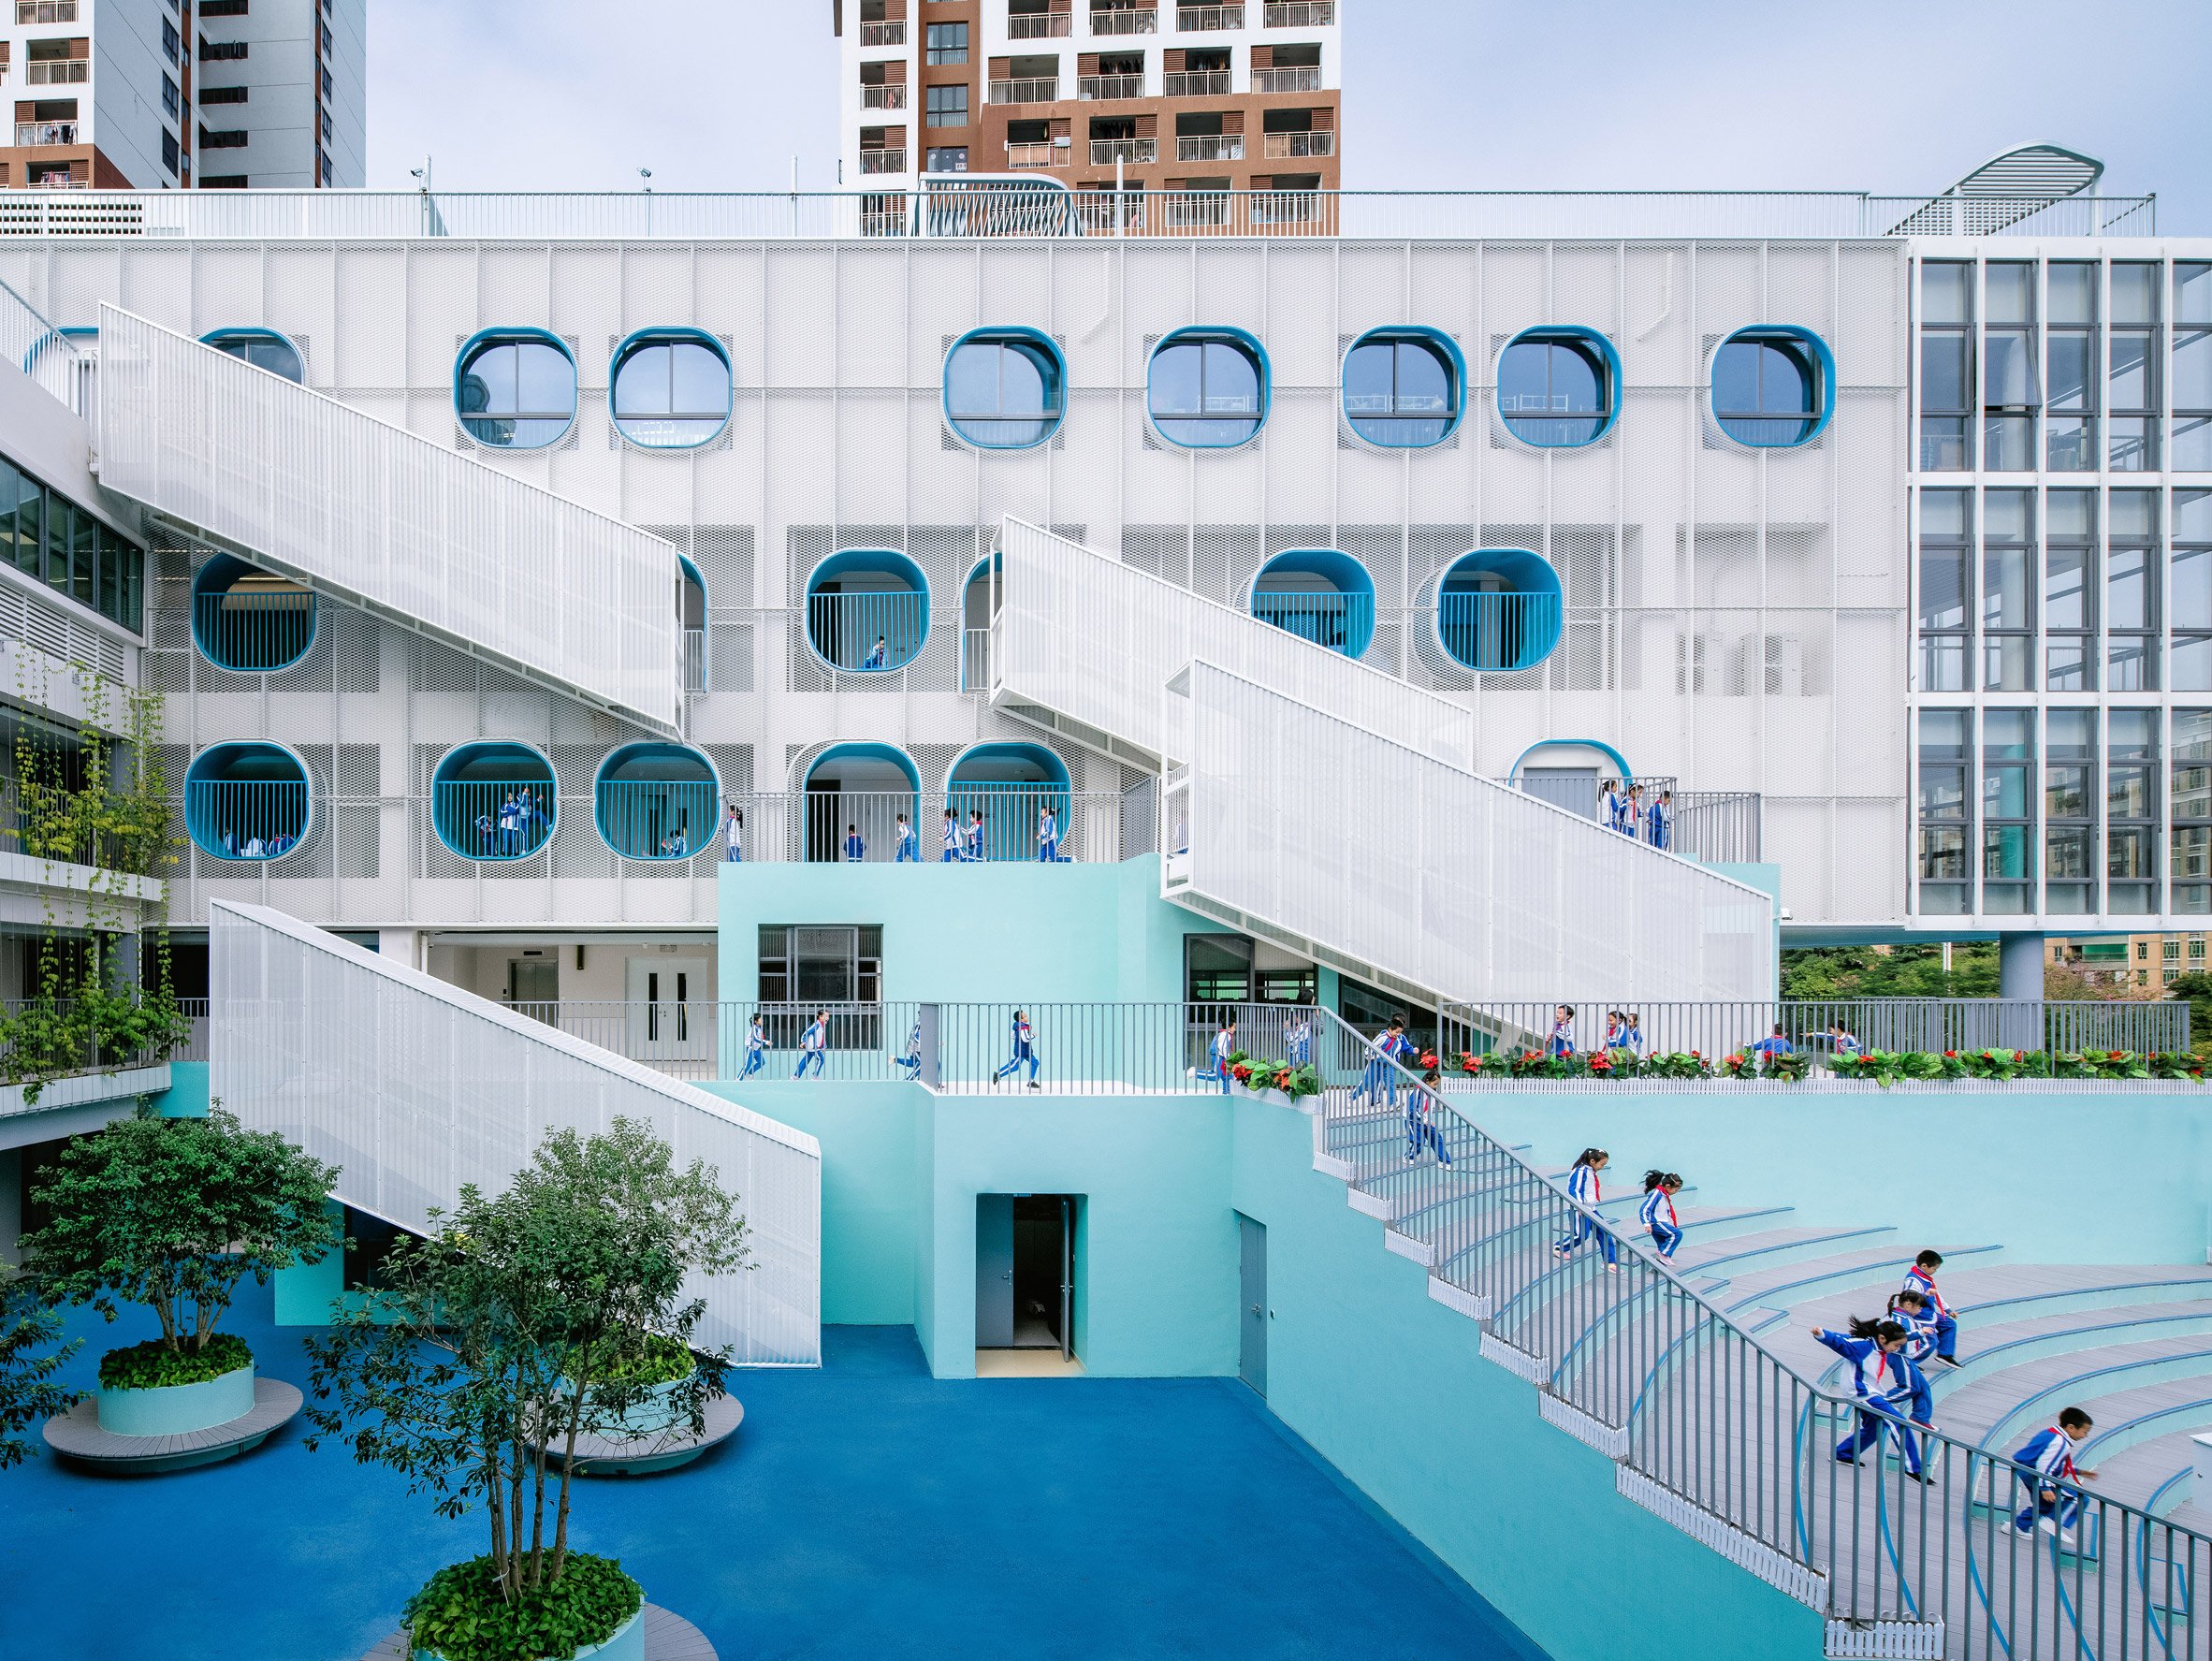 Facade and terrace of Fuqiang Elementary School by People's Architecture Office